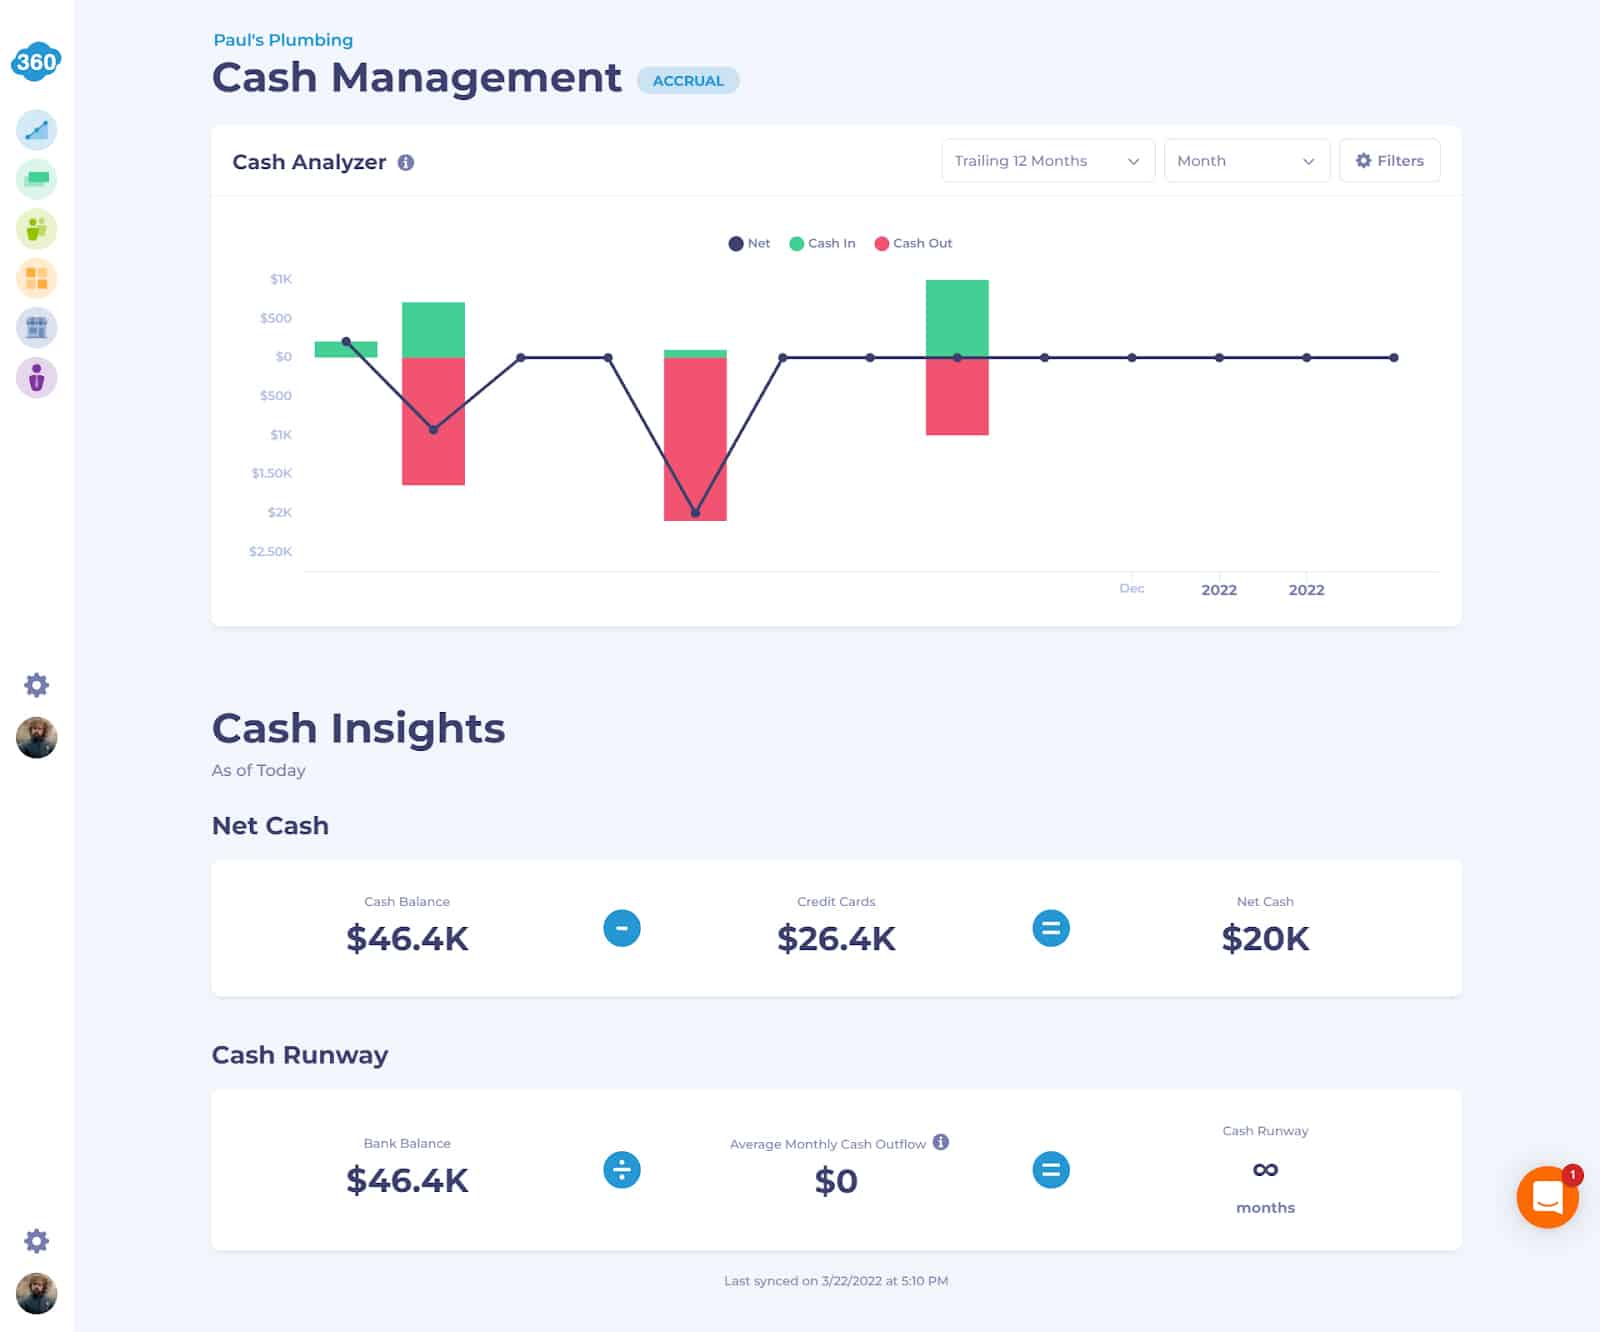 Bookkeeper360 cash management and insights page.